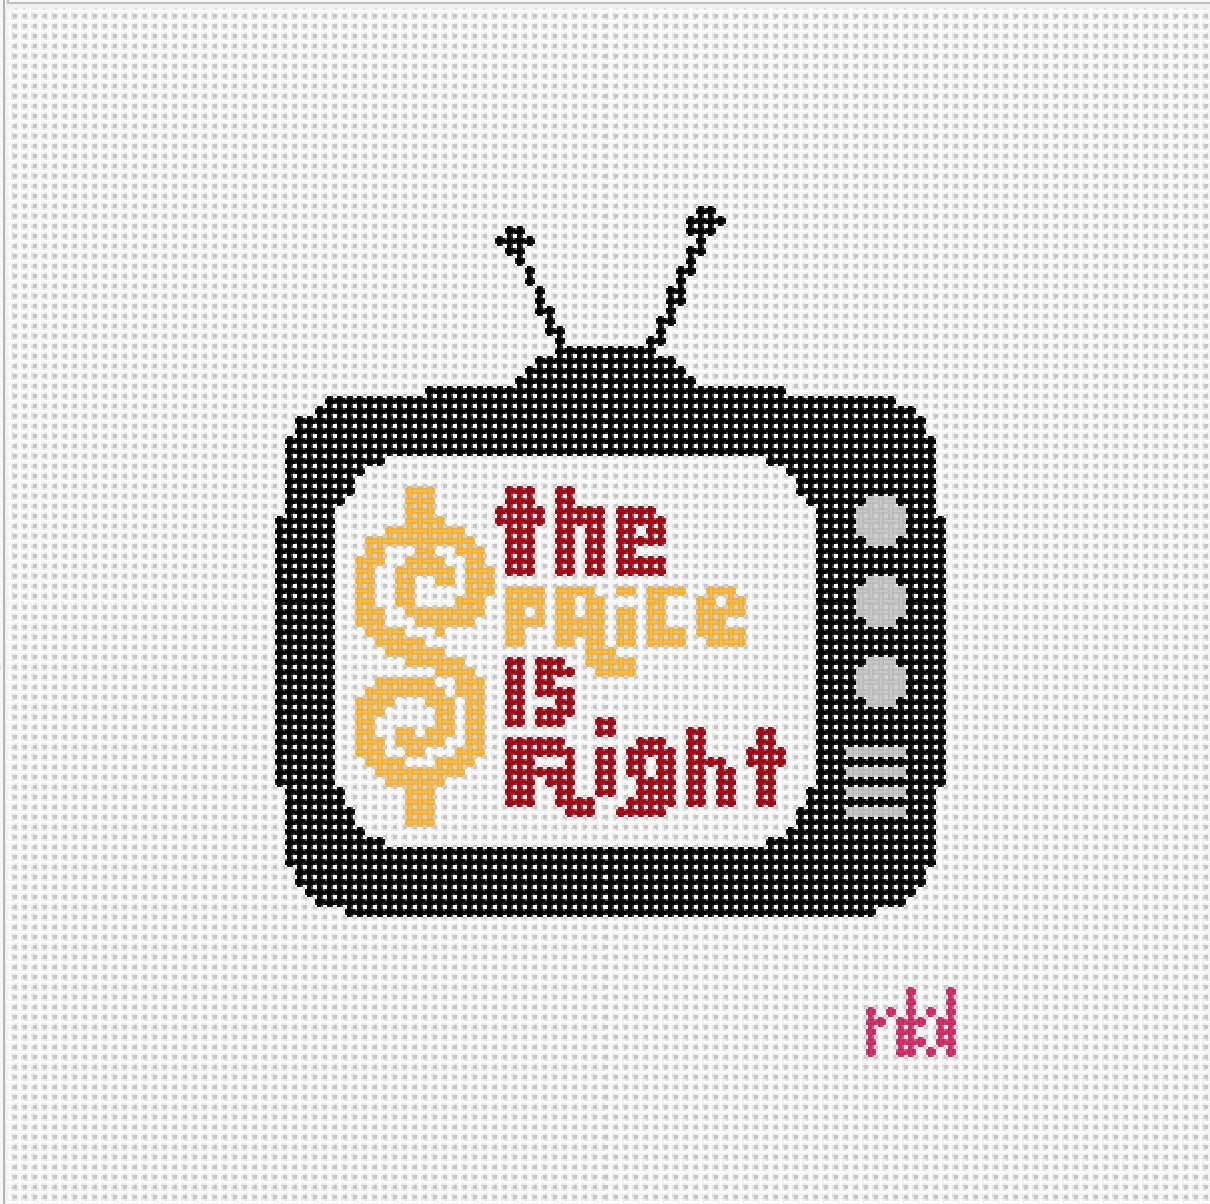 Retro TV Needlepoint Canvas The Price is Right - Needlepoint by Laura